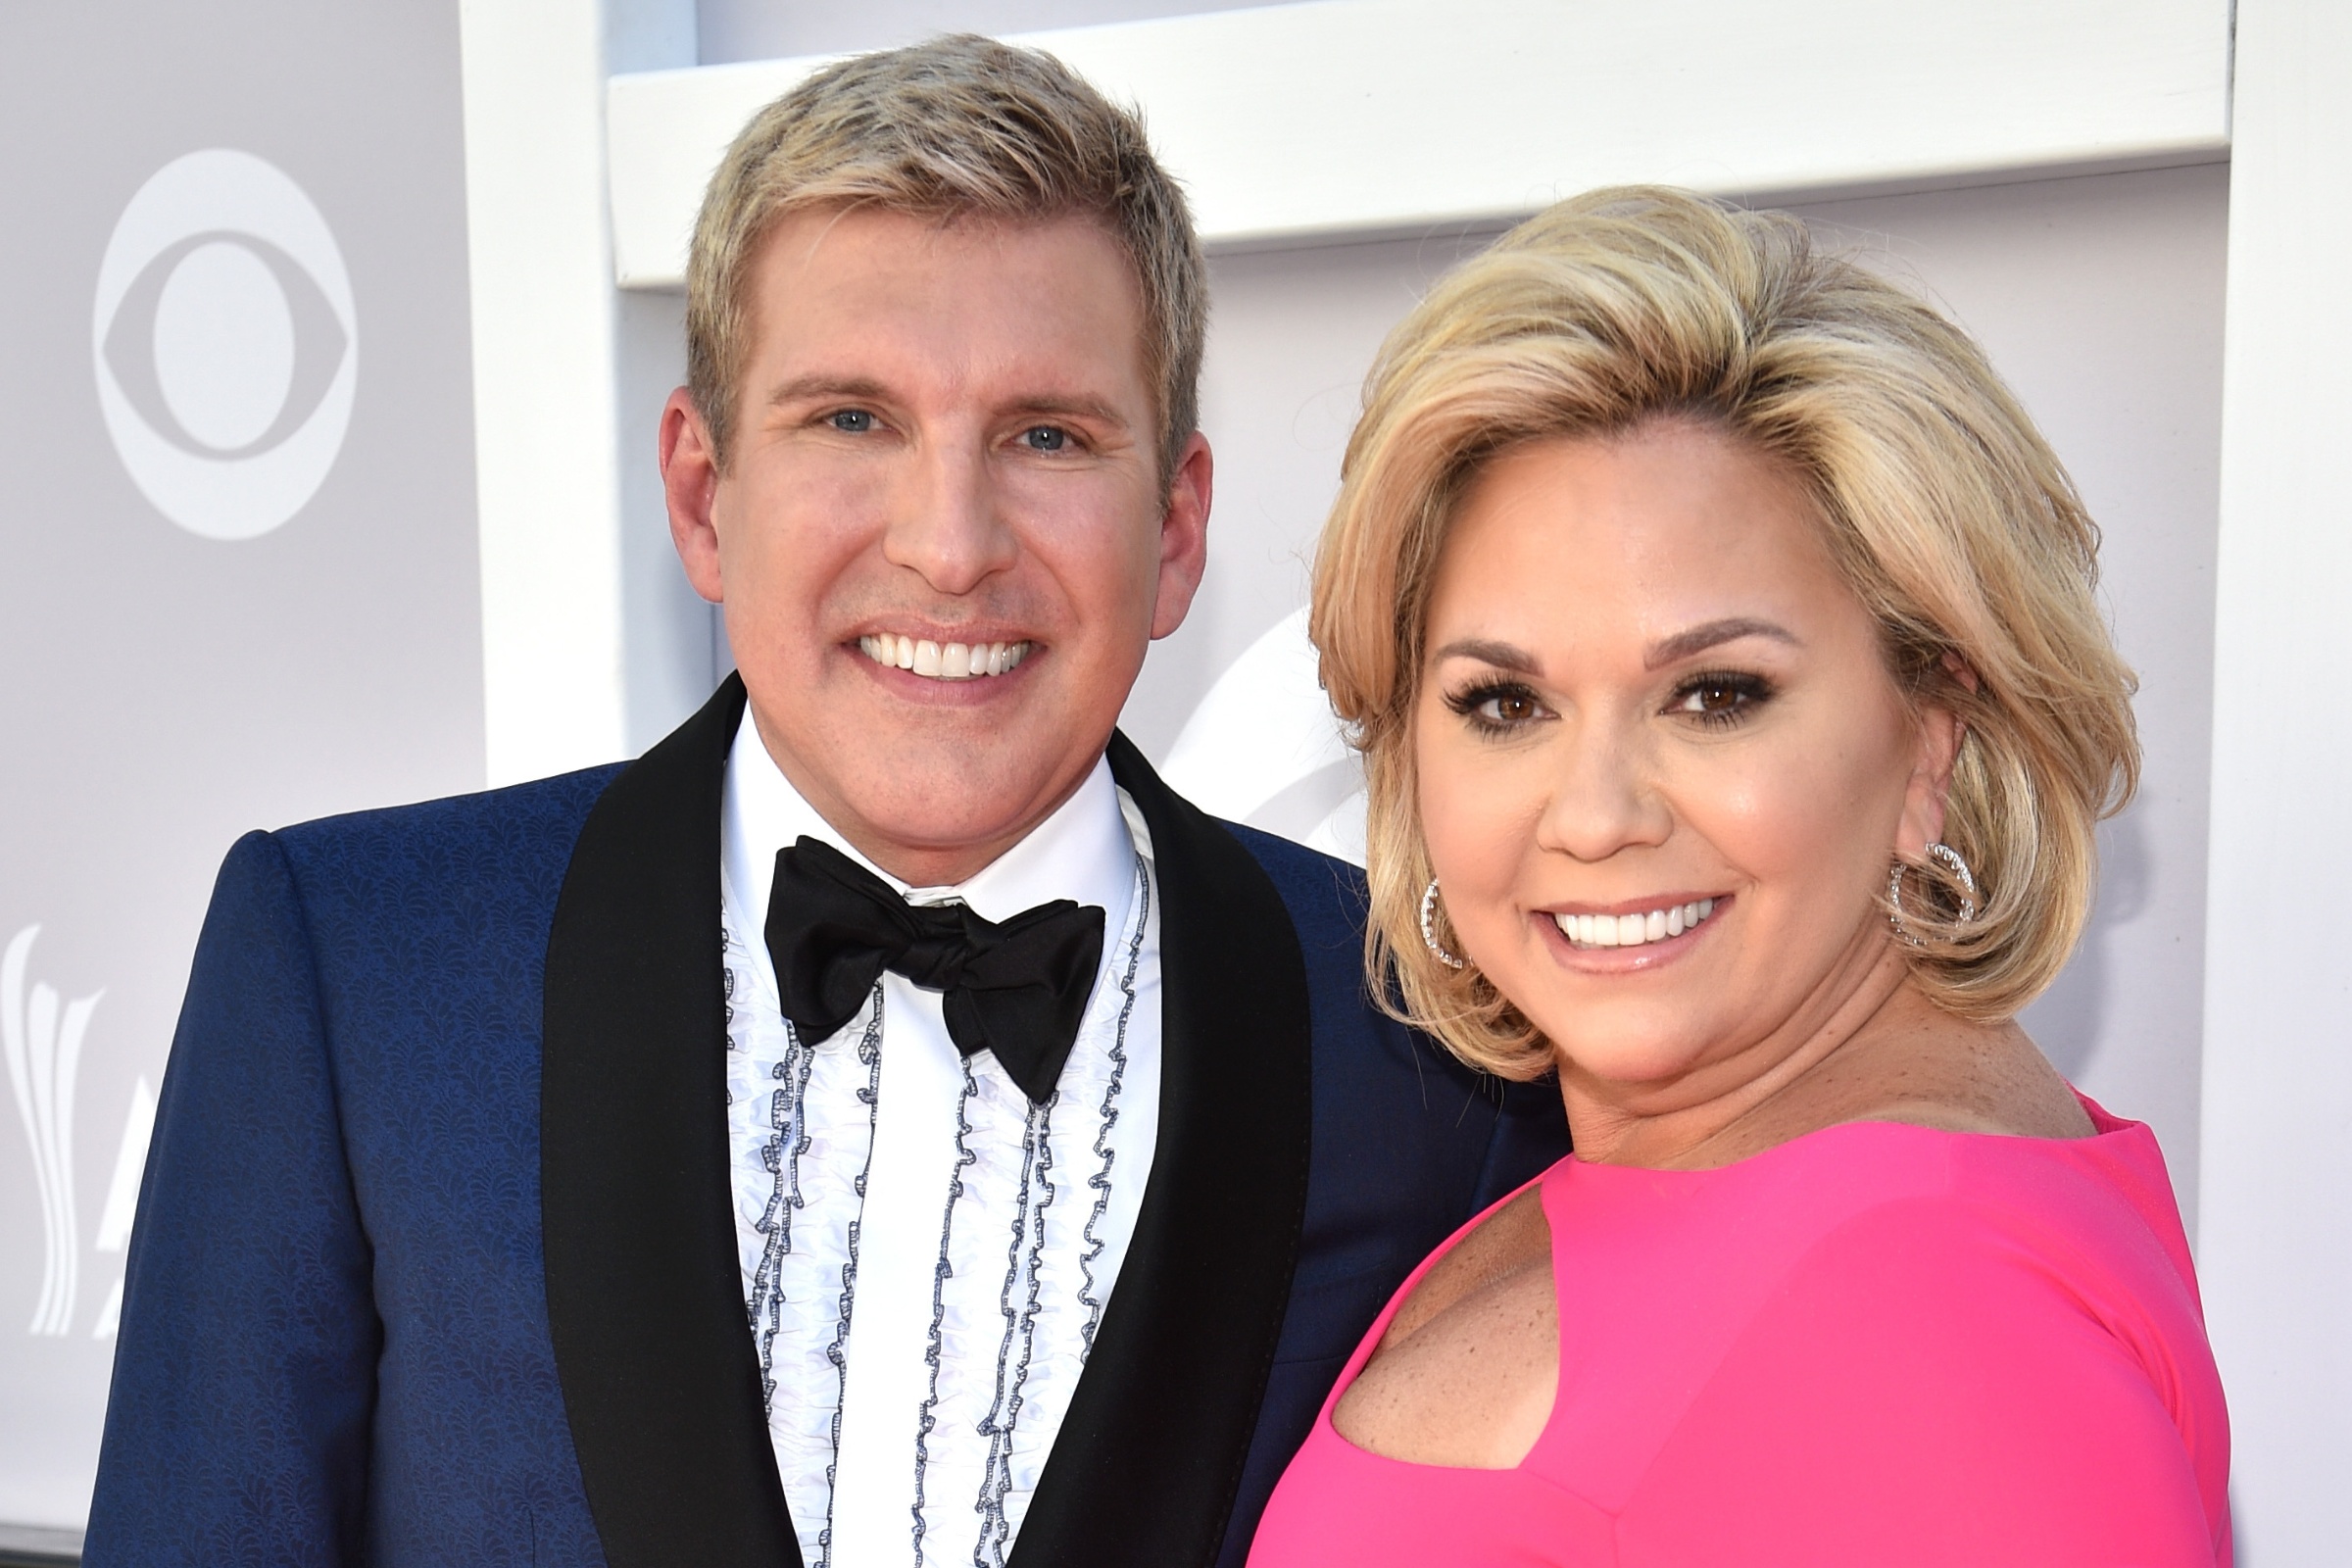 What Is Tax Evasion? Why Todd and Julie Chrisley Are Heading to Prison